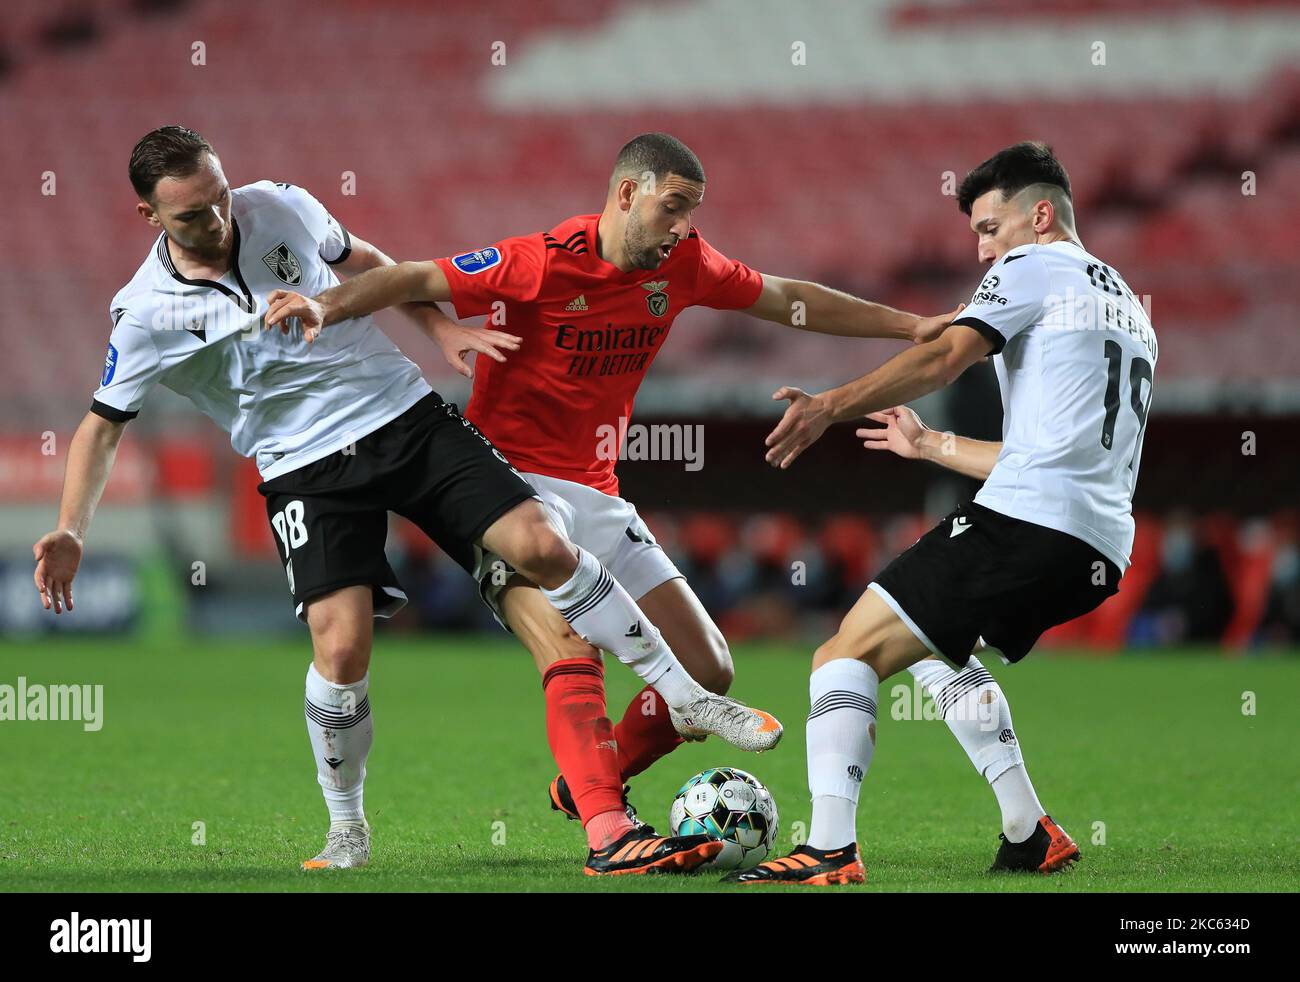 Adel Taarabt of SL Benfica with Nicolas Janvier and Pepelu of Vitoria SC in action during the Portuguese League Cup match between SL Benfica and Vitoria SC at Estadio da Luz on December 16, 2020 in Lisbon, Portugal.(Photo by Paulo Nascimento/NurPhoto) Stock Photo